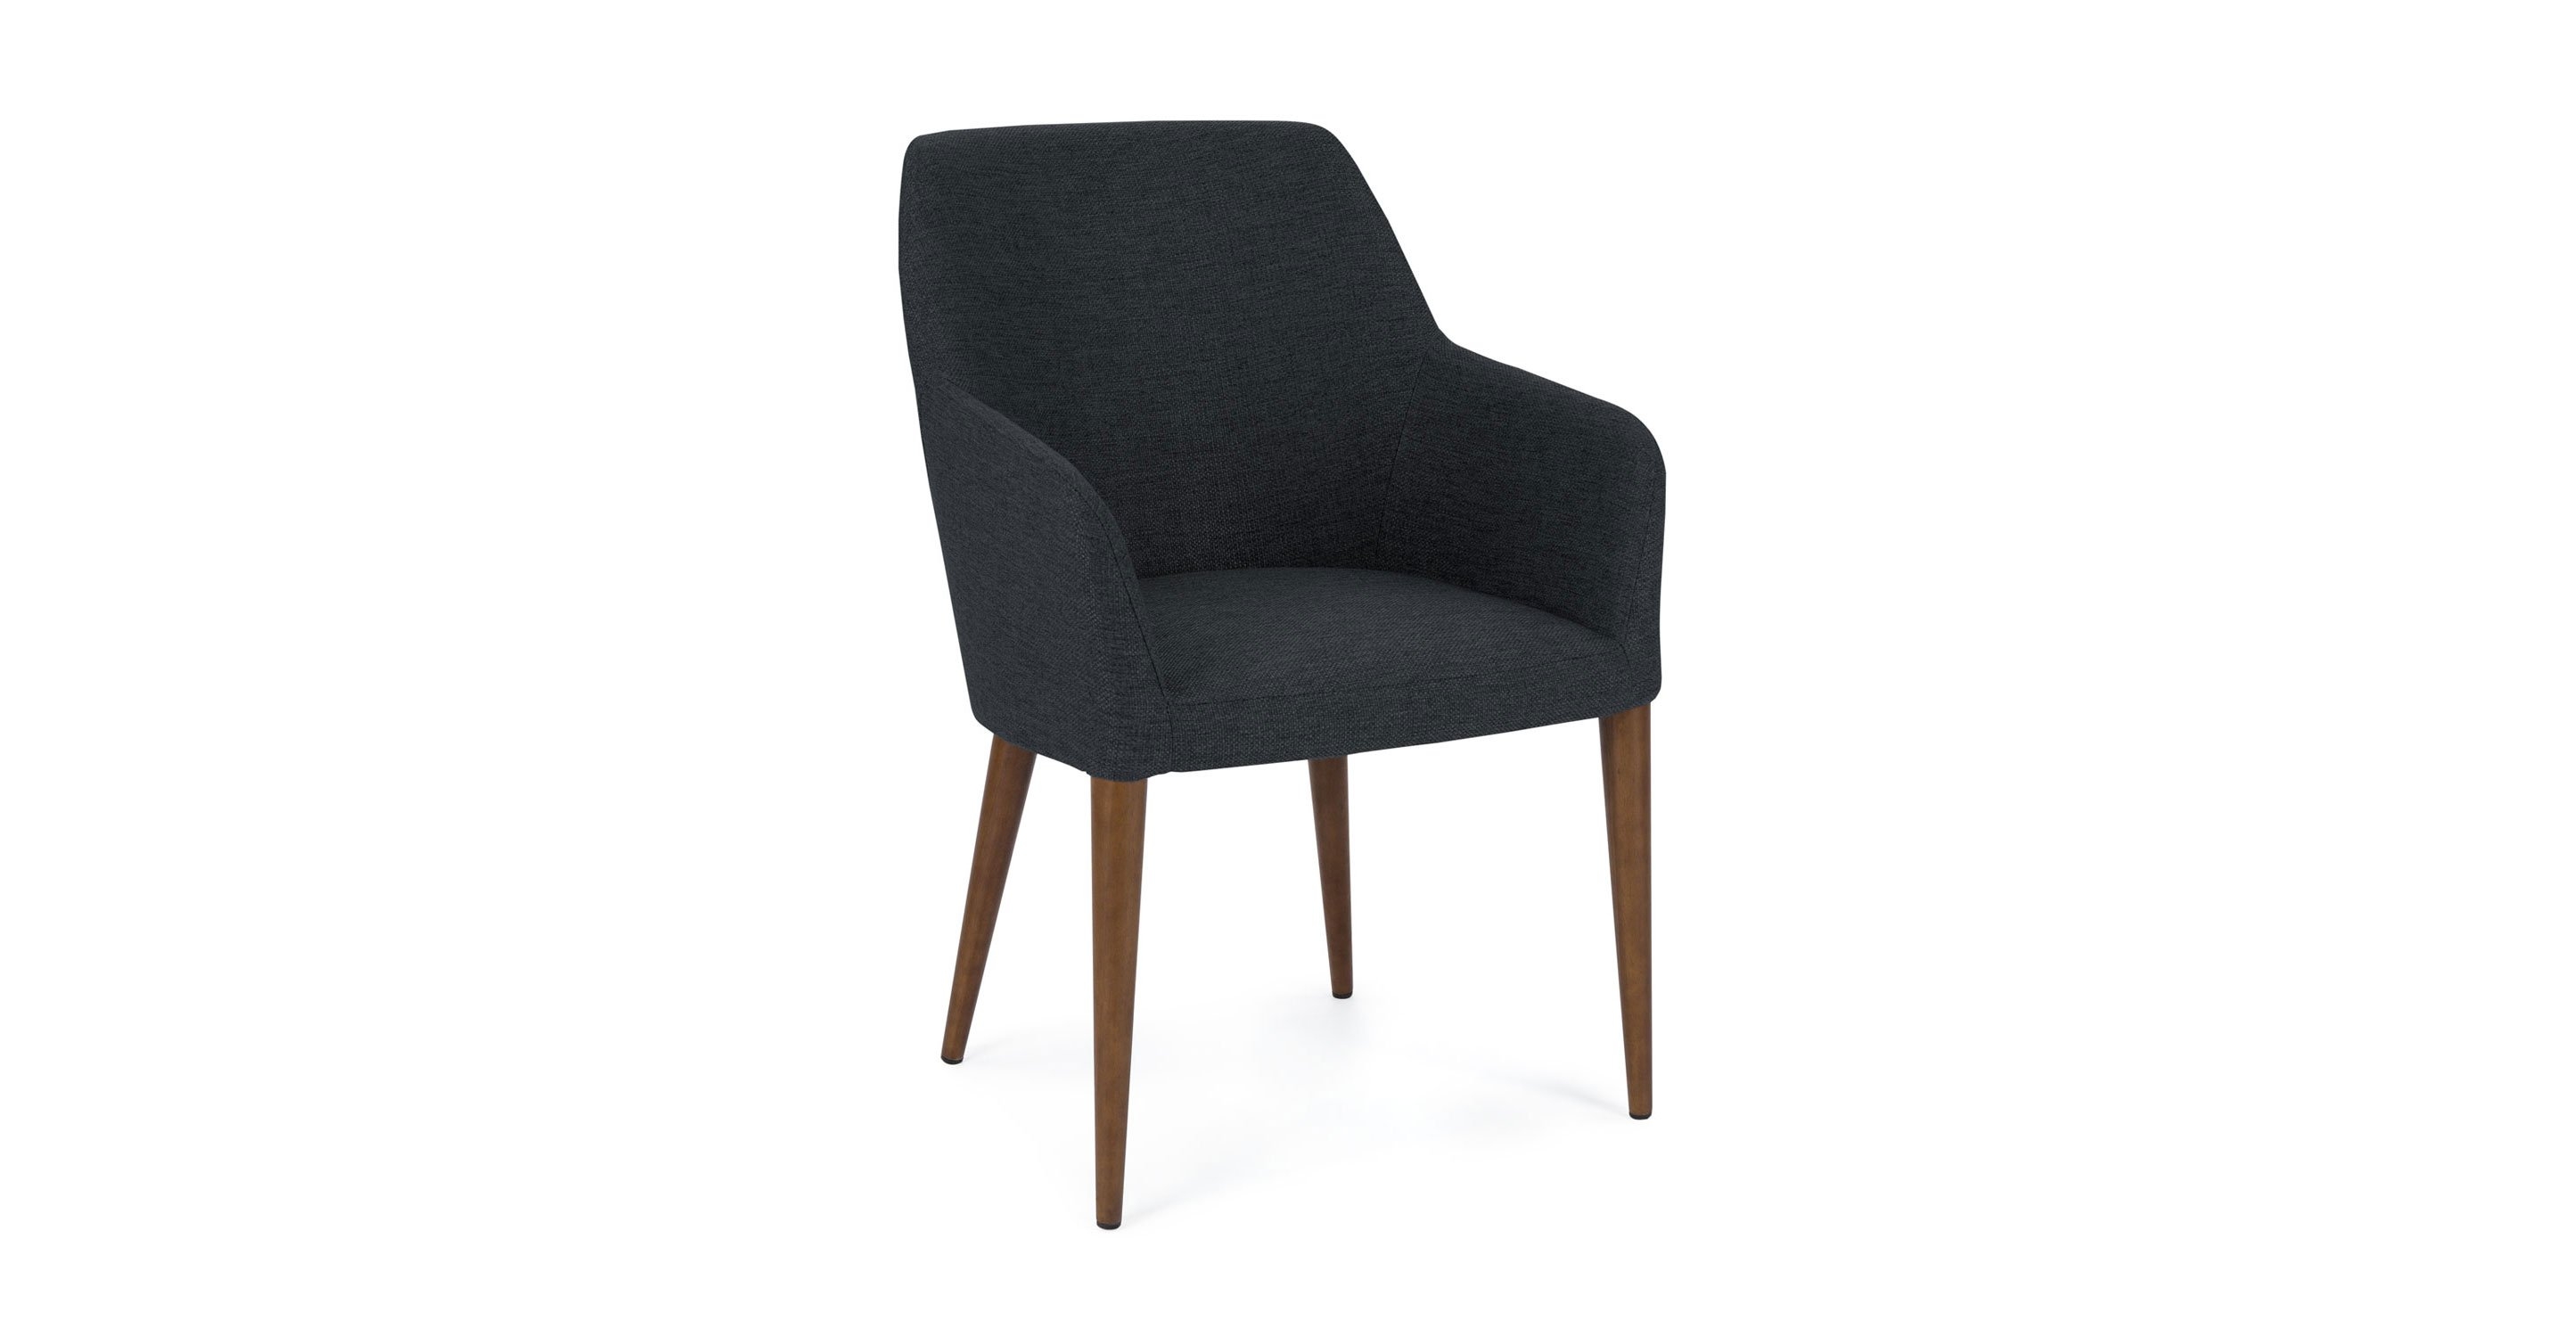 Feast Bard Gray Dining Chair - Image 0